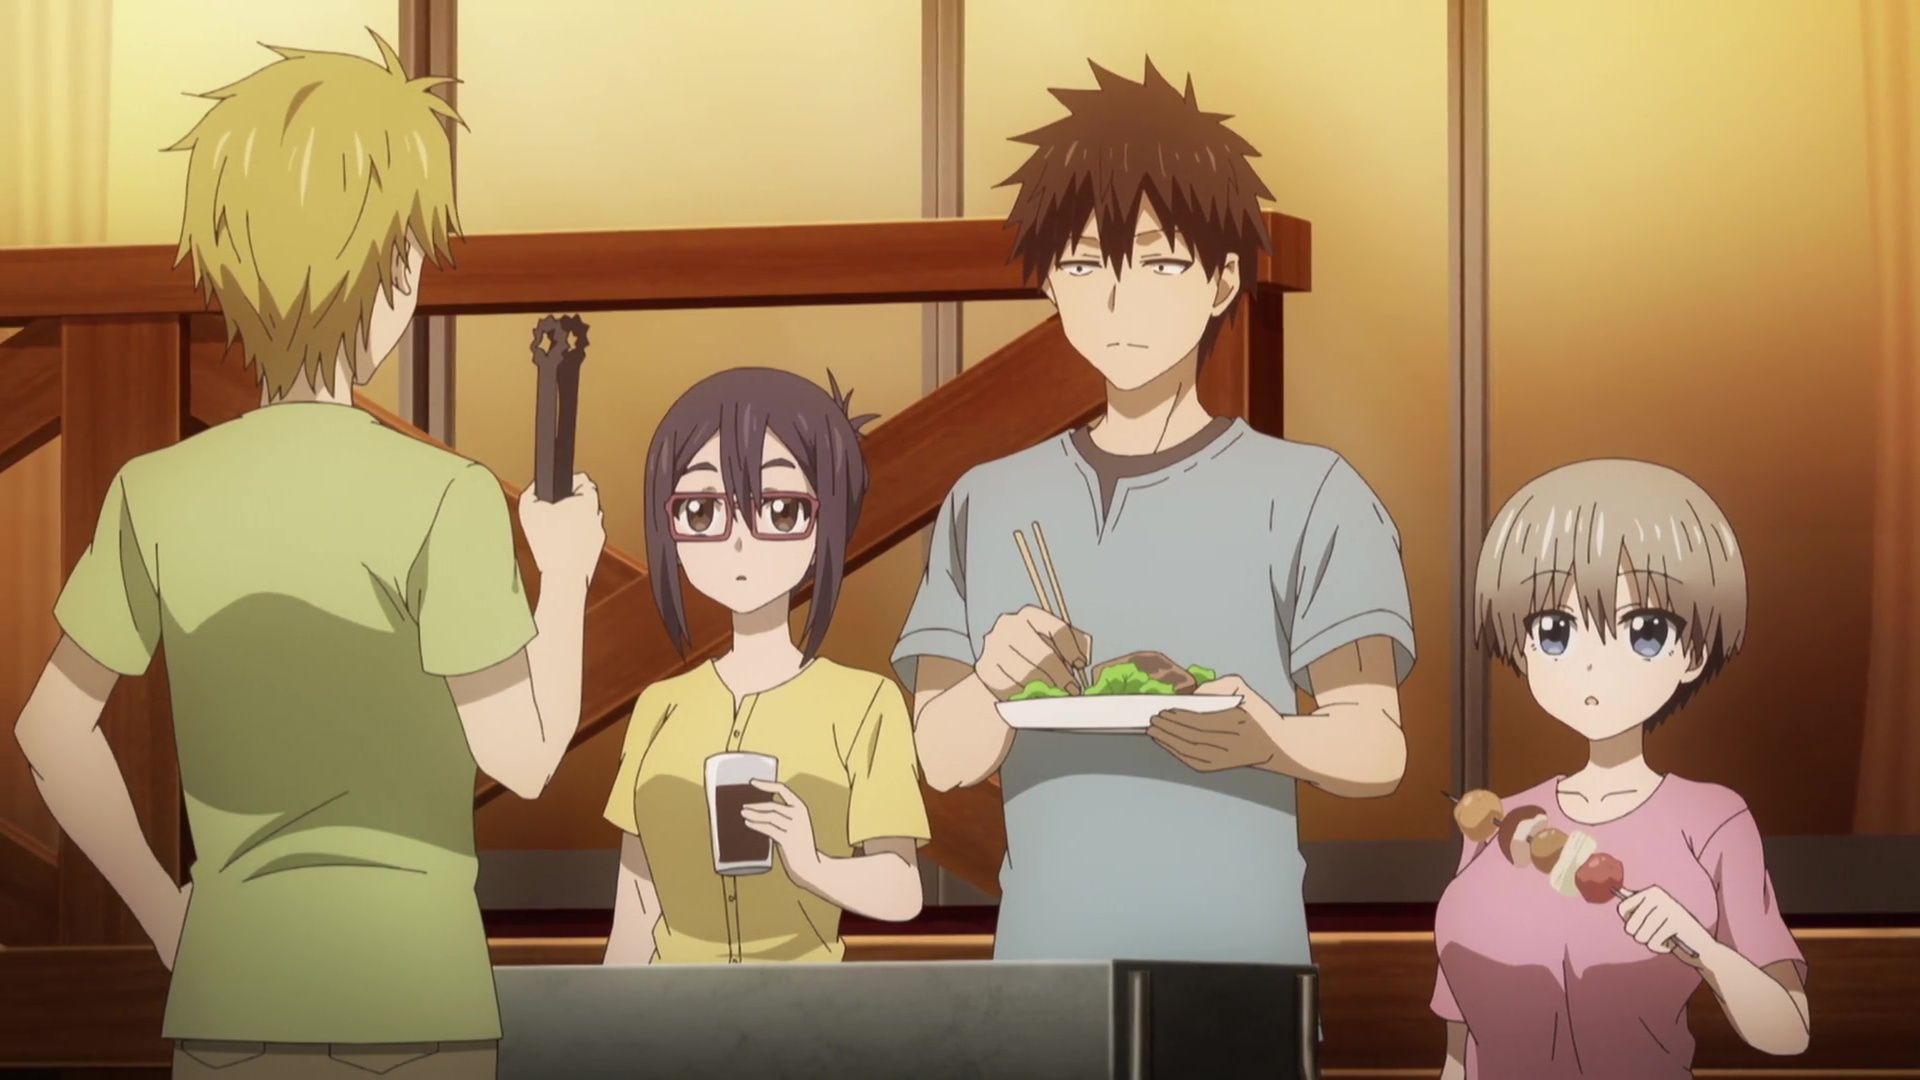 Uzaki Chan Wants To Hang Out Episode 7 Release Date, Preview, And Synopsis